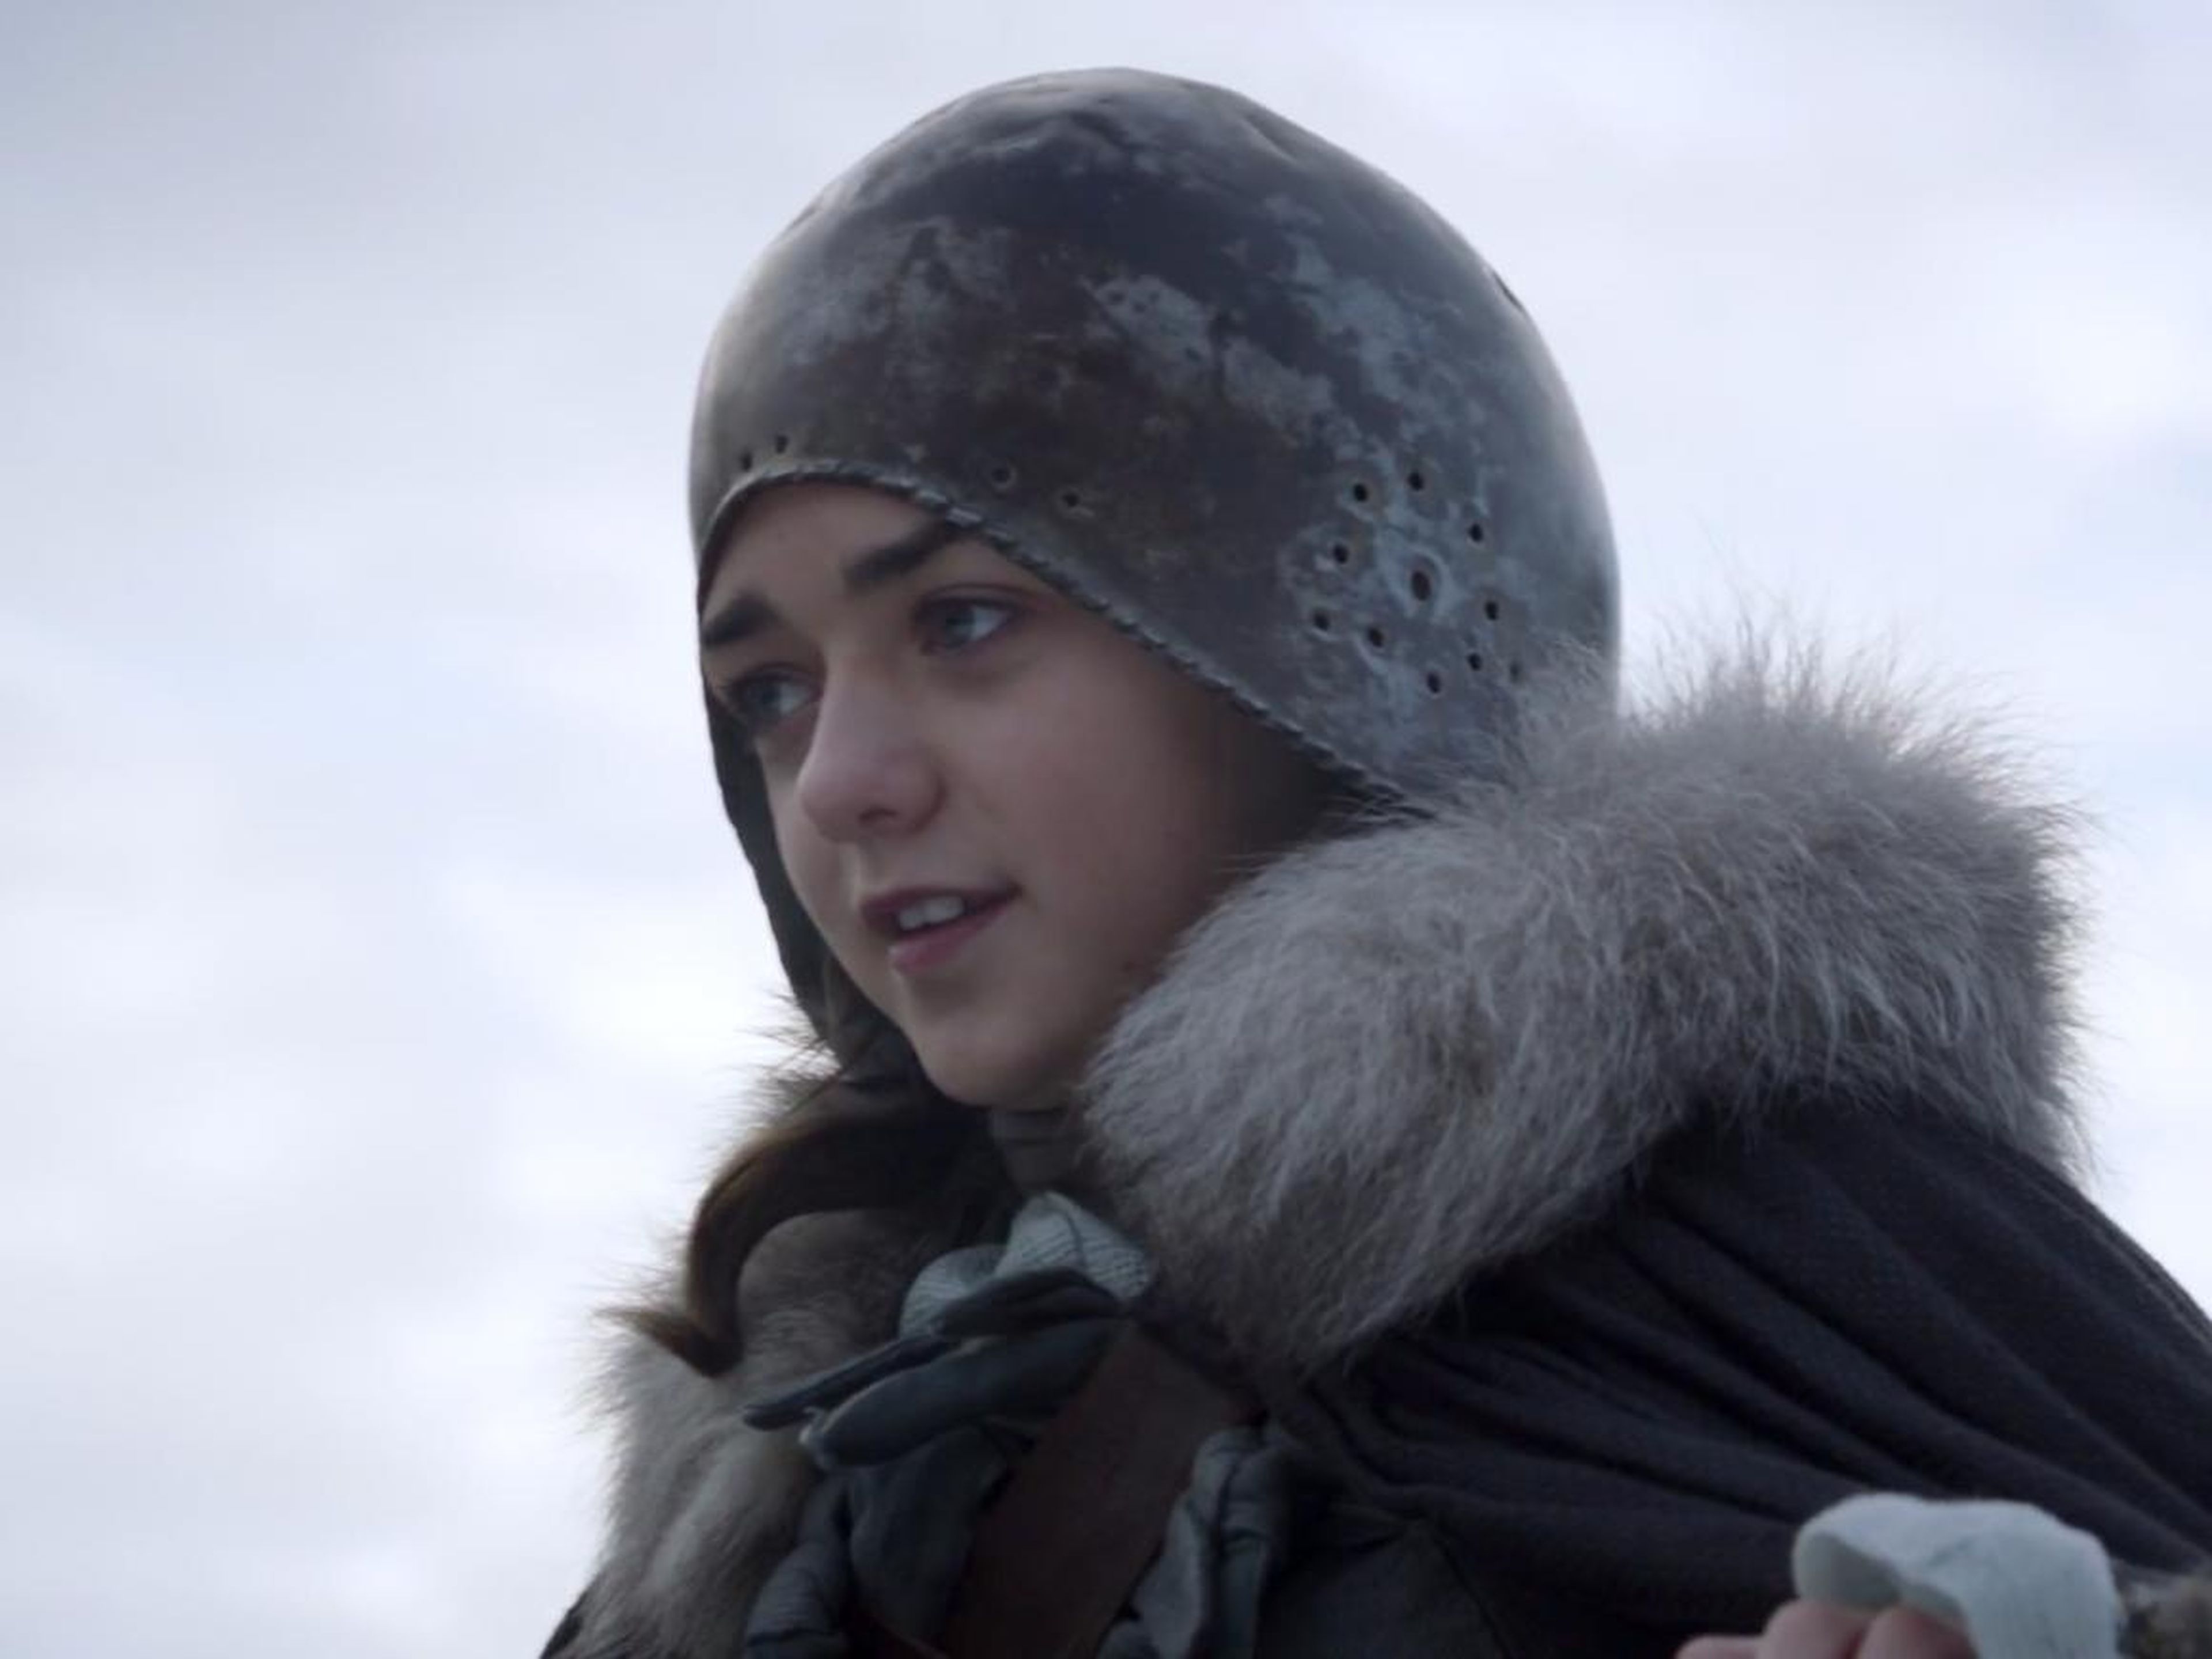 The first episode of "Game of Thrones," titled "Winter is Coming."